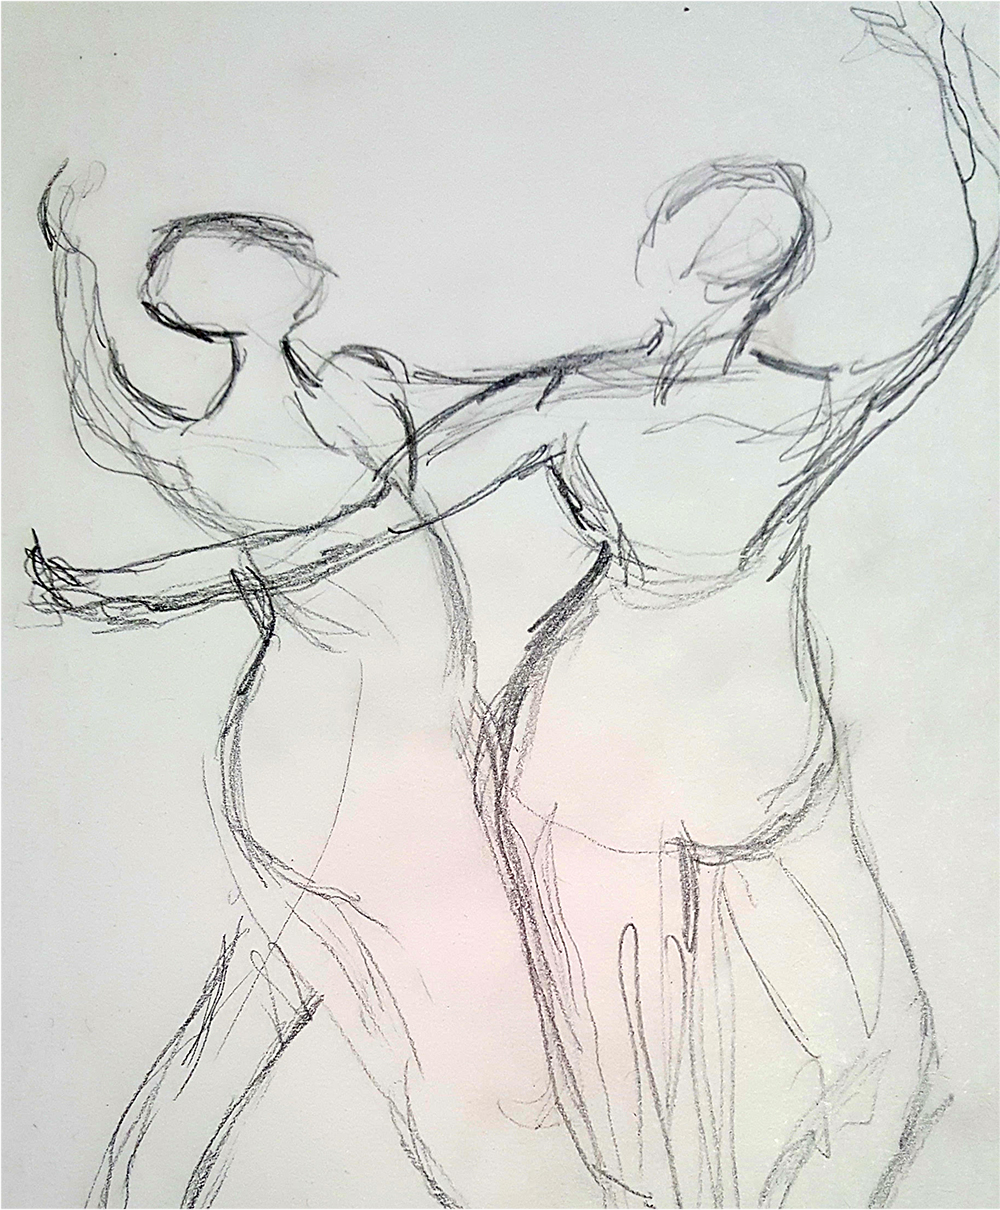 Line drawing by workshop participant of Sculpture by Degas